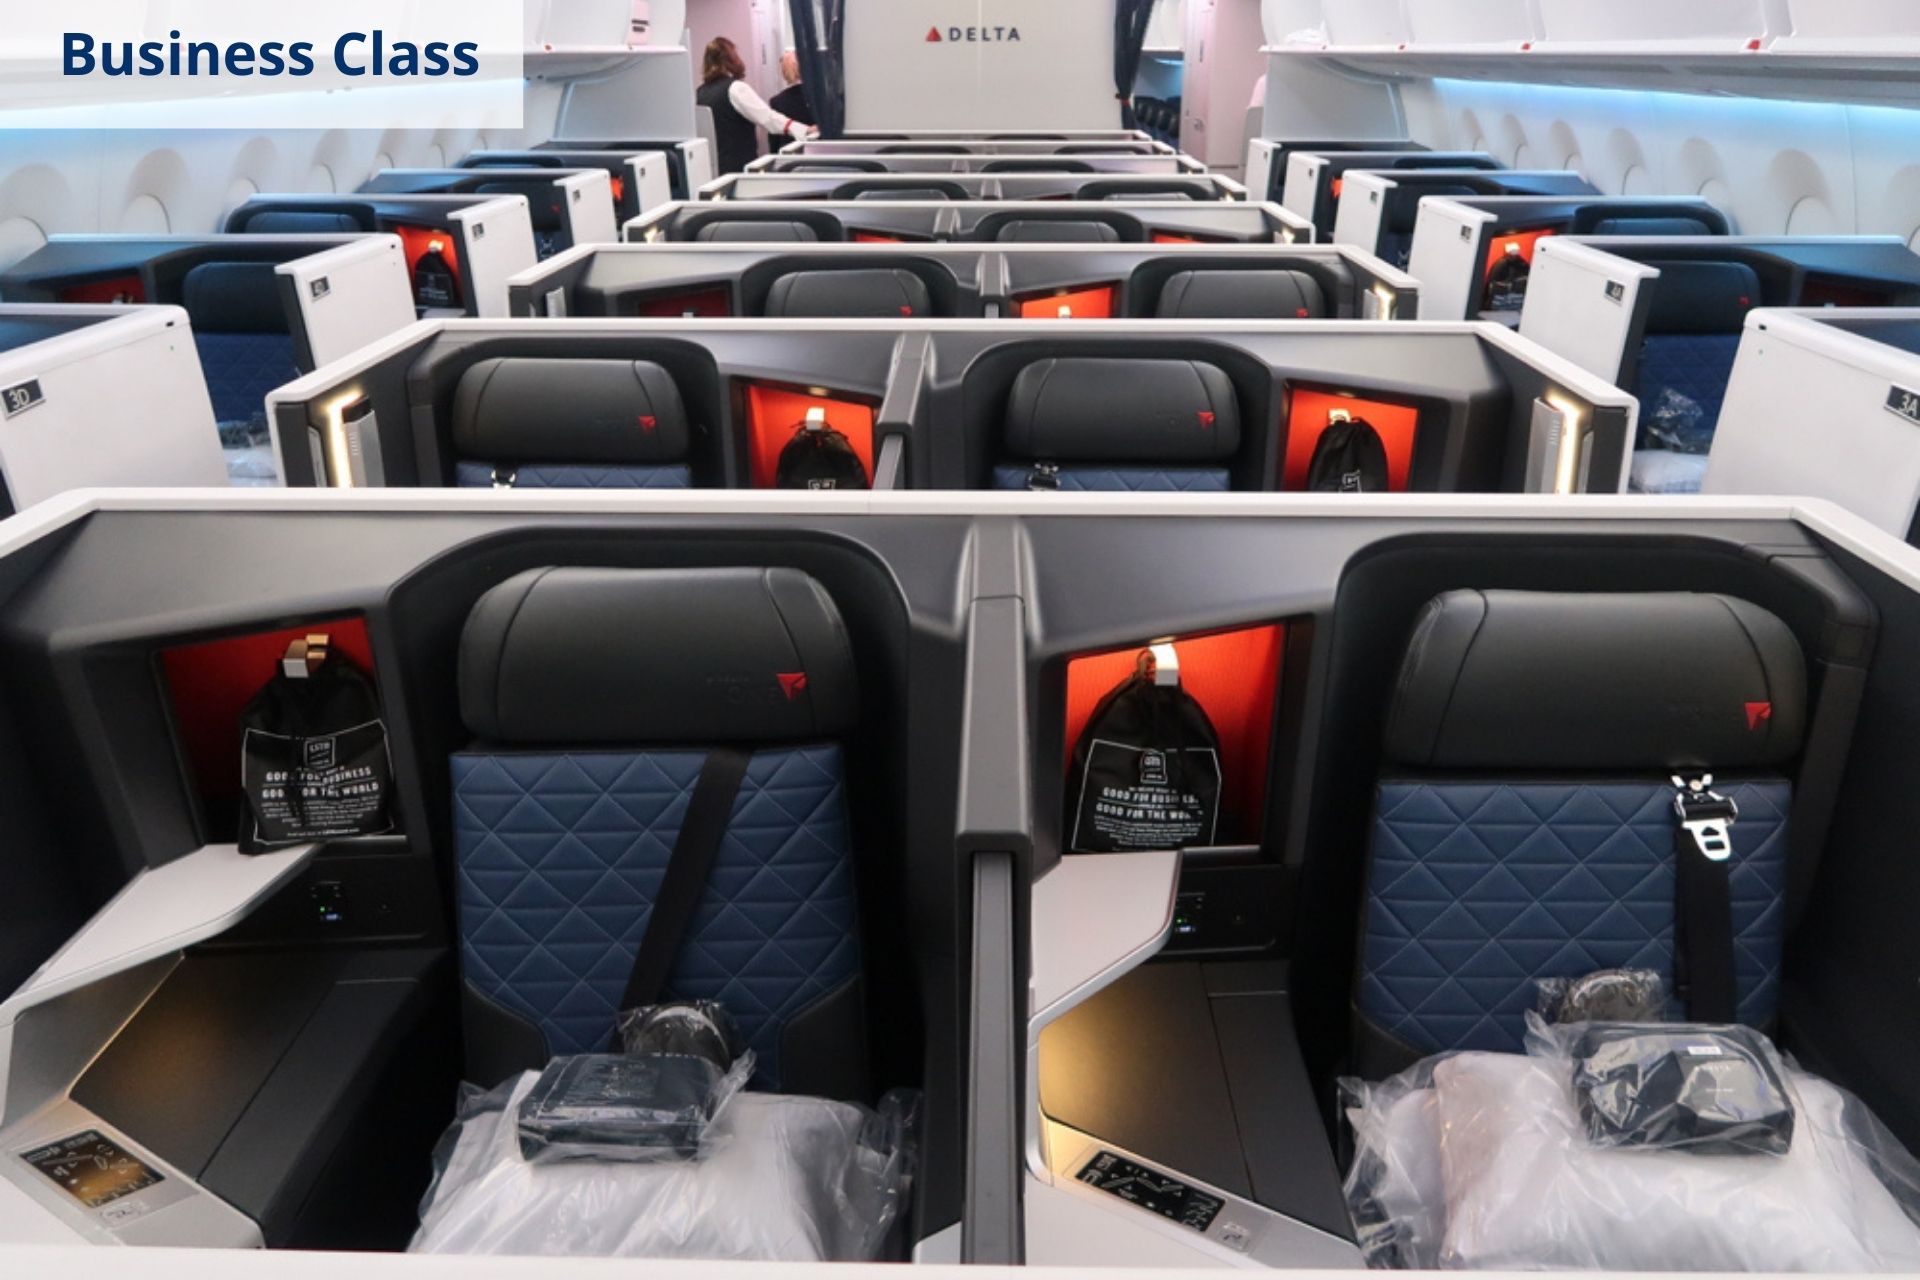 Delta Airlines business class